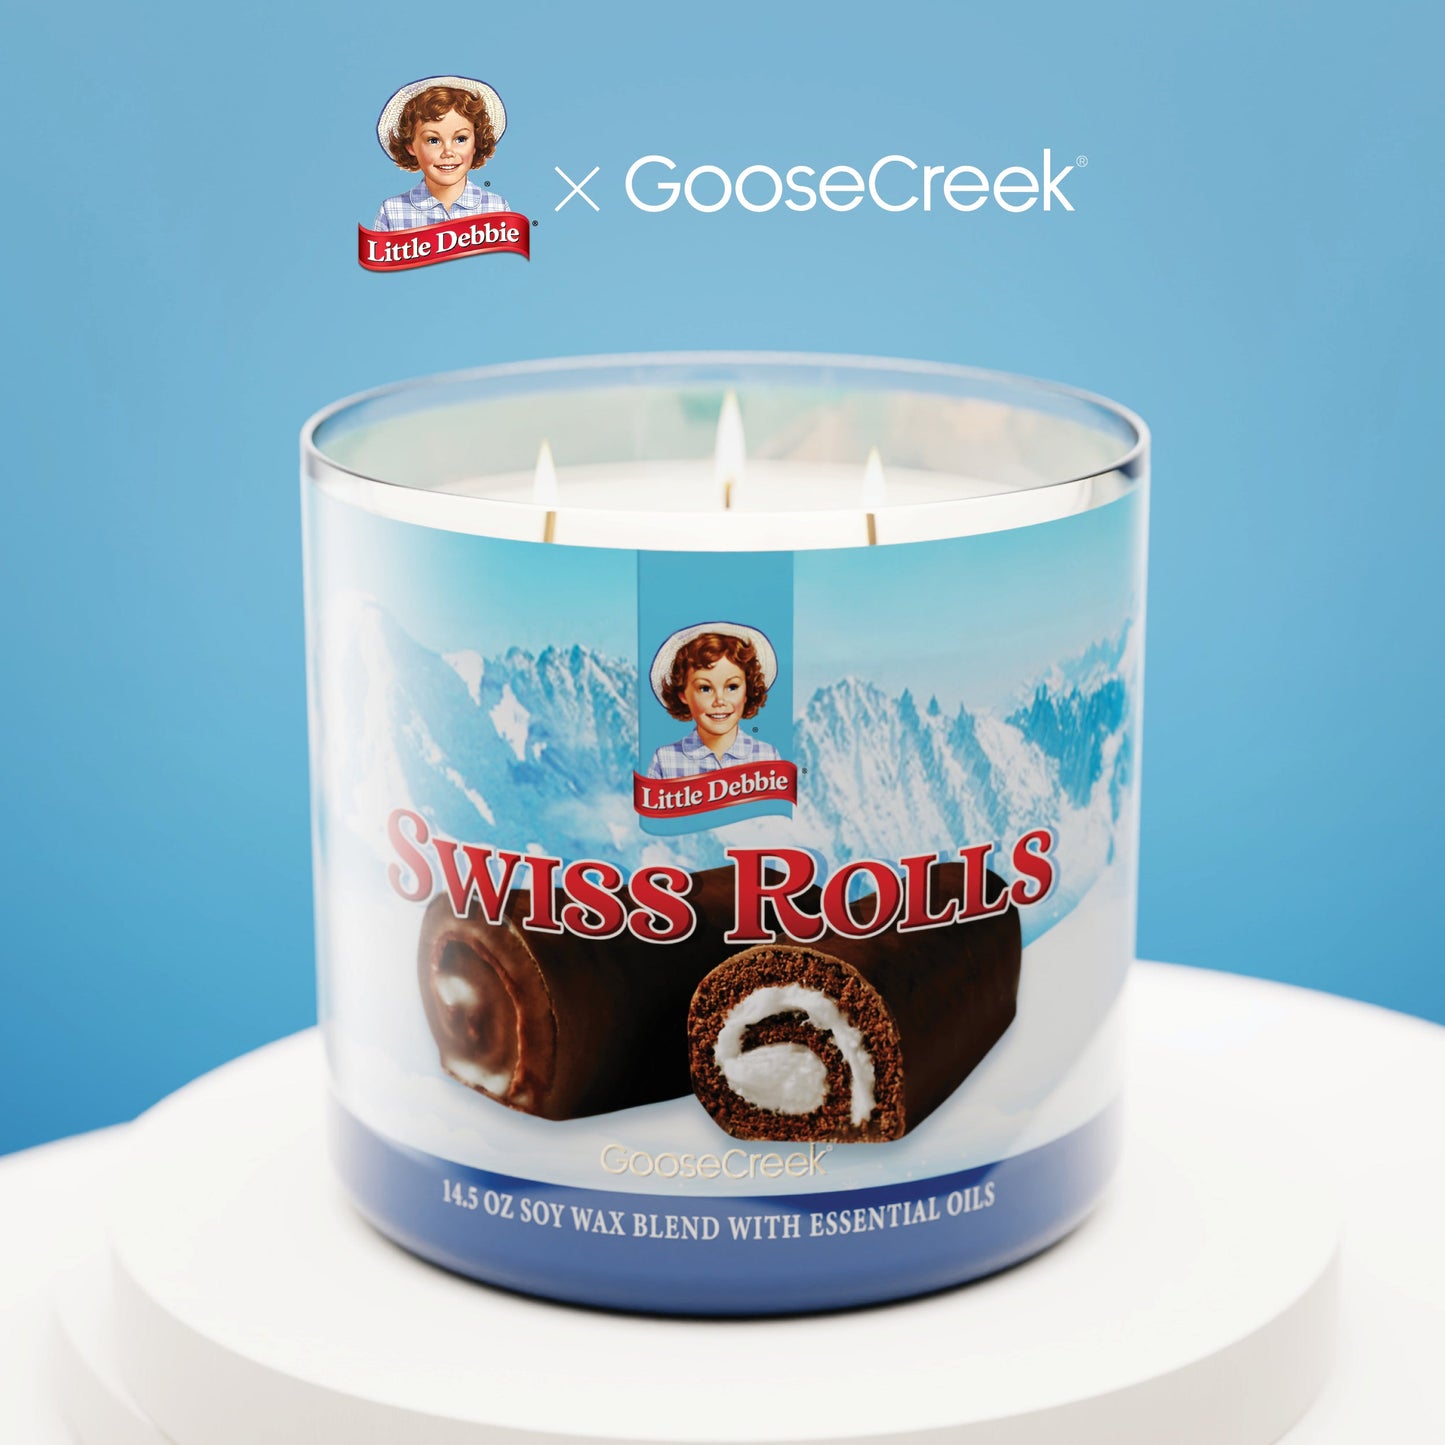 Load image into Gallery viewer, Swiss Rolls Little Debbie ™ 3-Wick Candle
